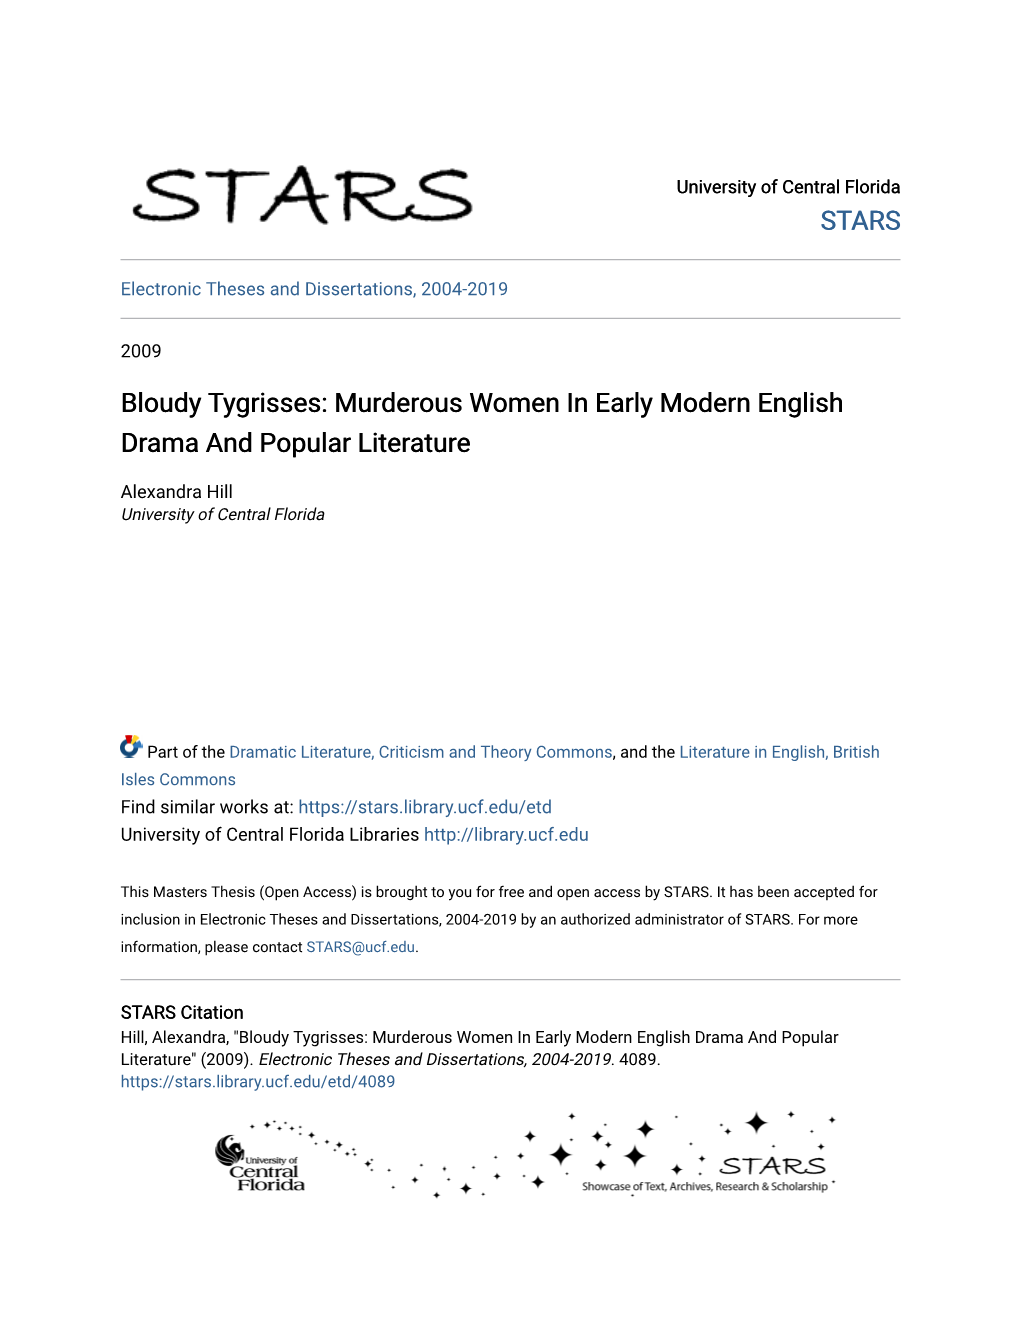 Murderous Women in Early Modern English Drama and Popular Literature